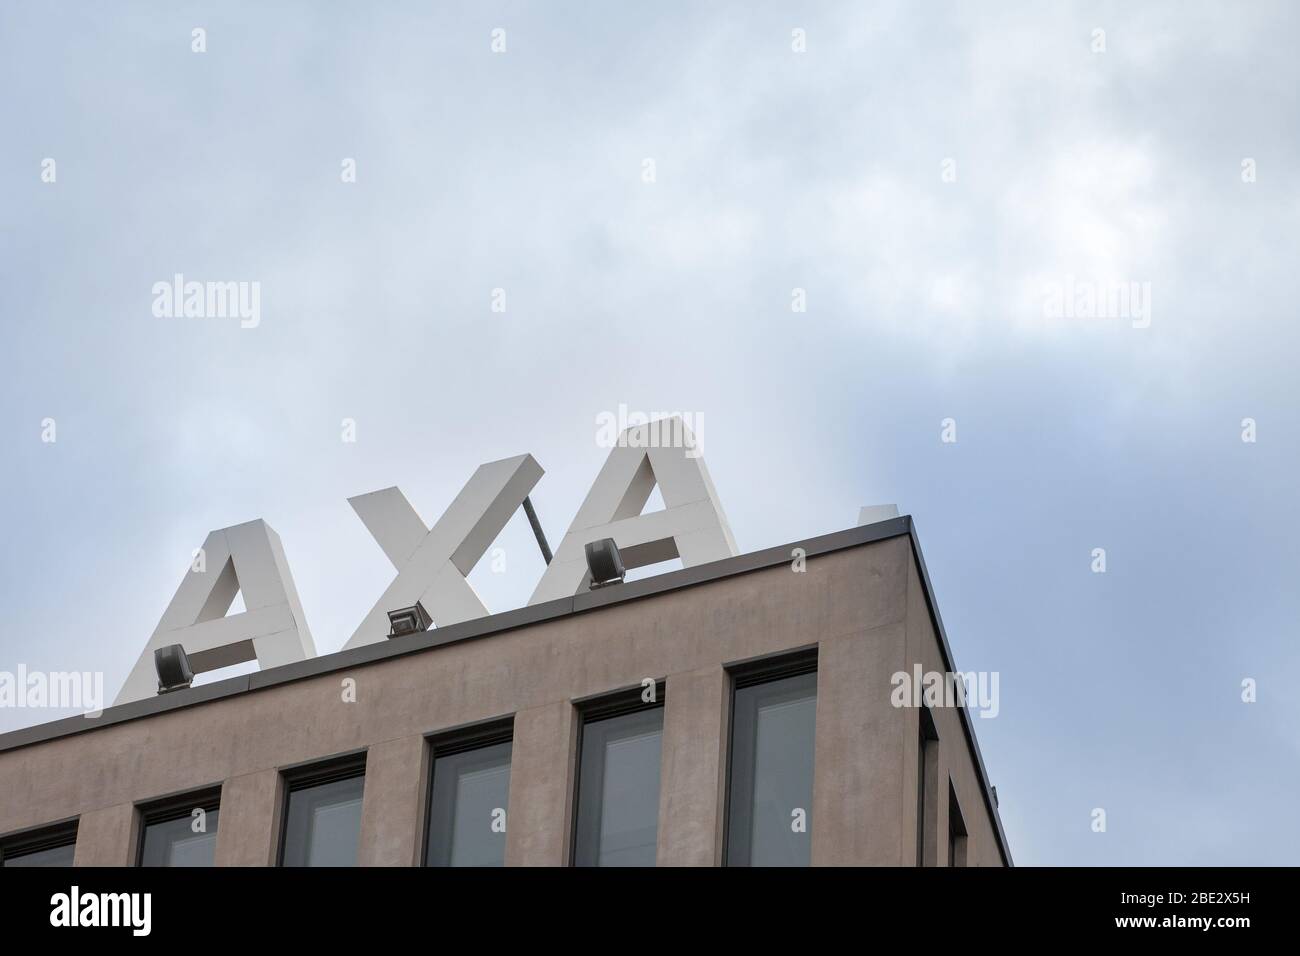 BRNO, CZECHIA - NOVEMBER 4, 2019:  Axa logo on their local agent in Brno. Axa is a French insurance and banking group, one of the biggest insurers of Stock Photo